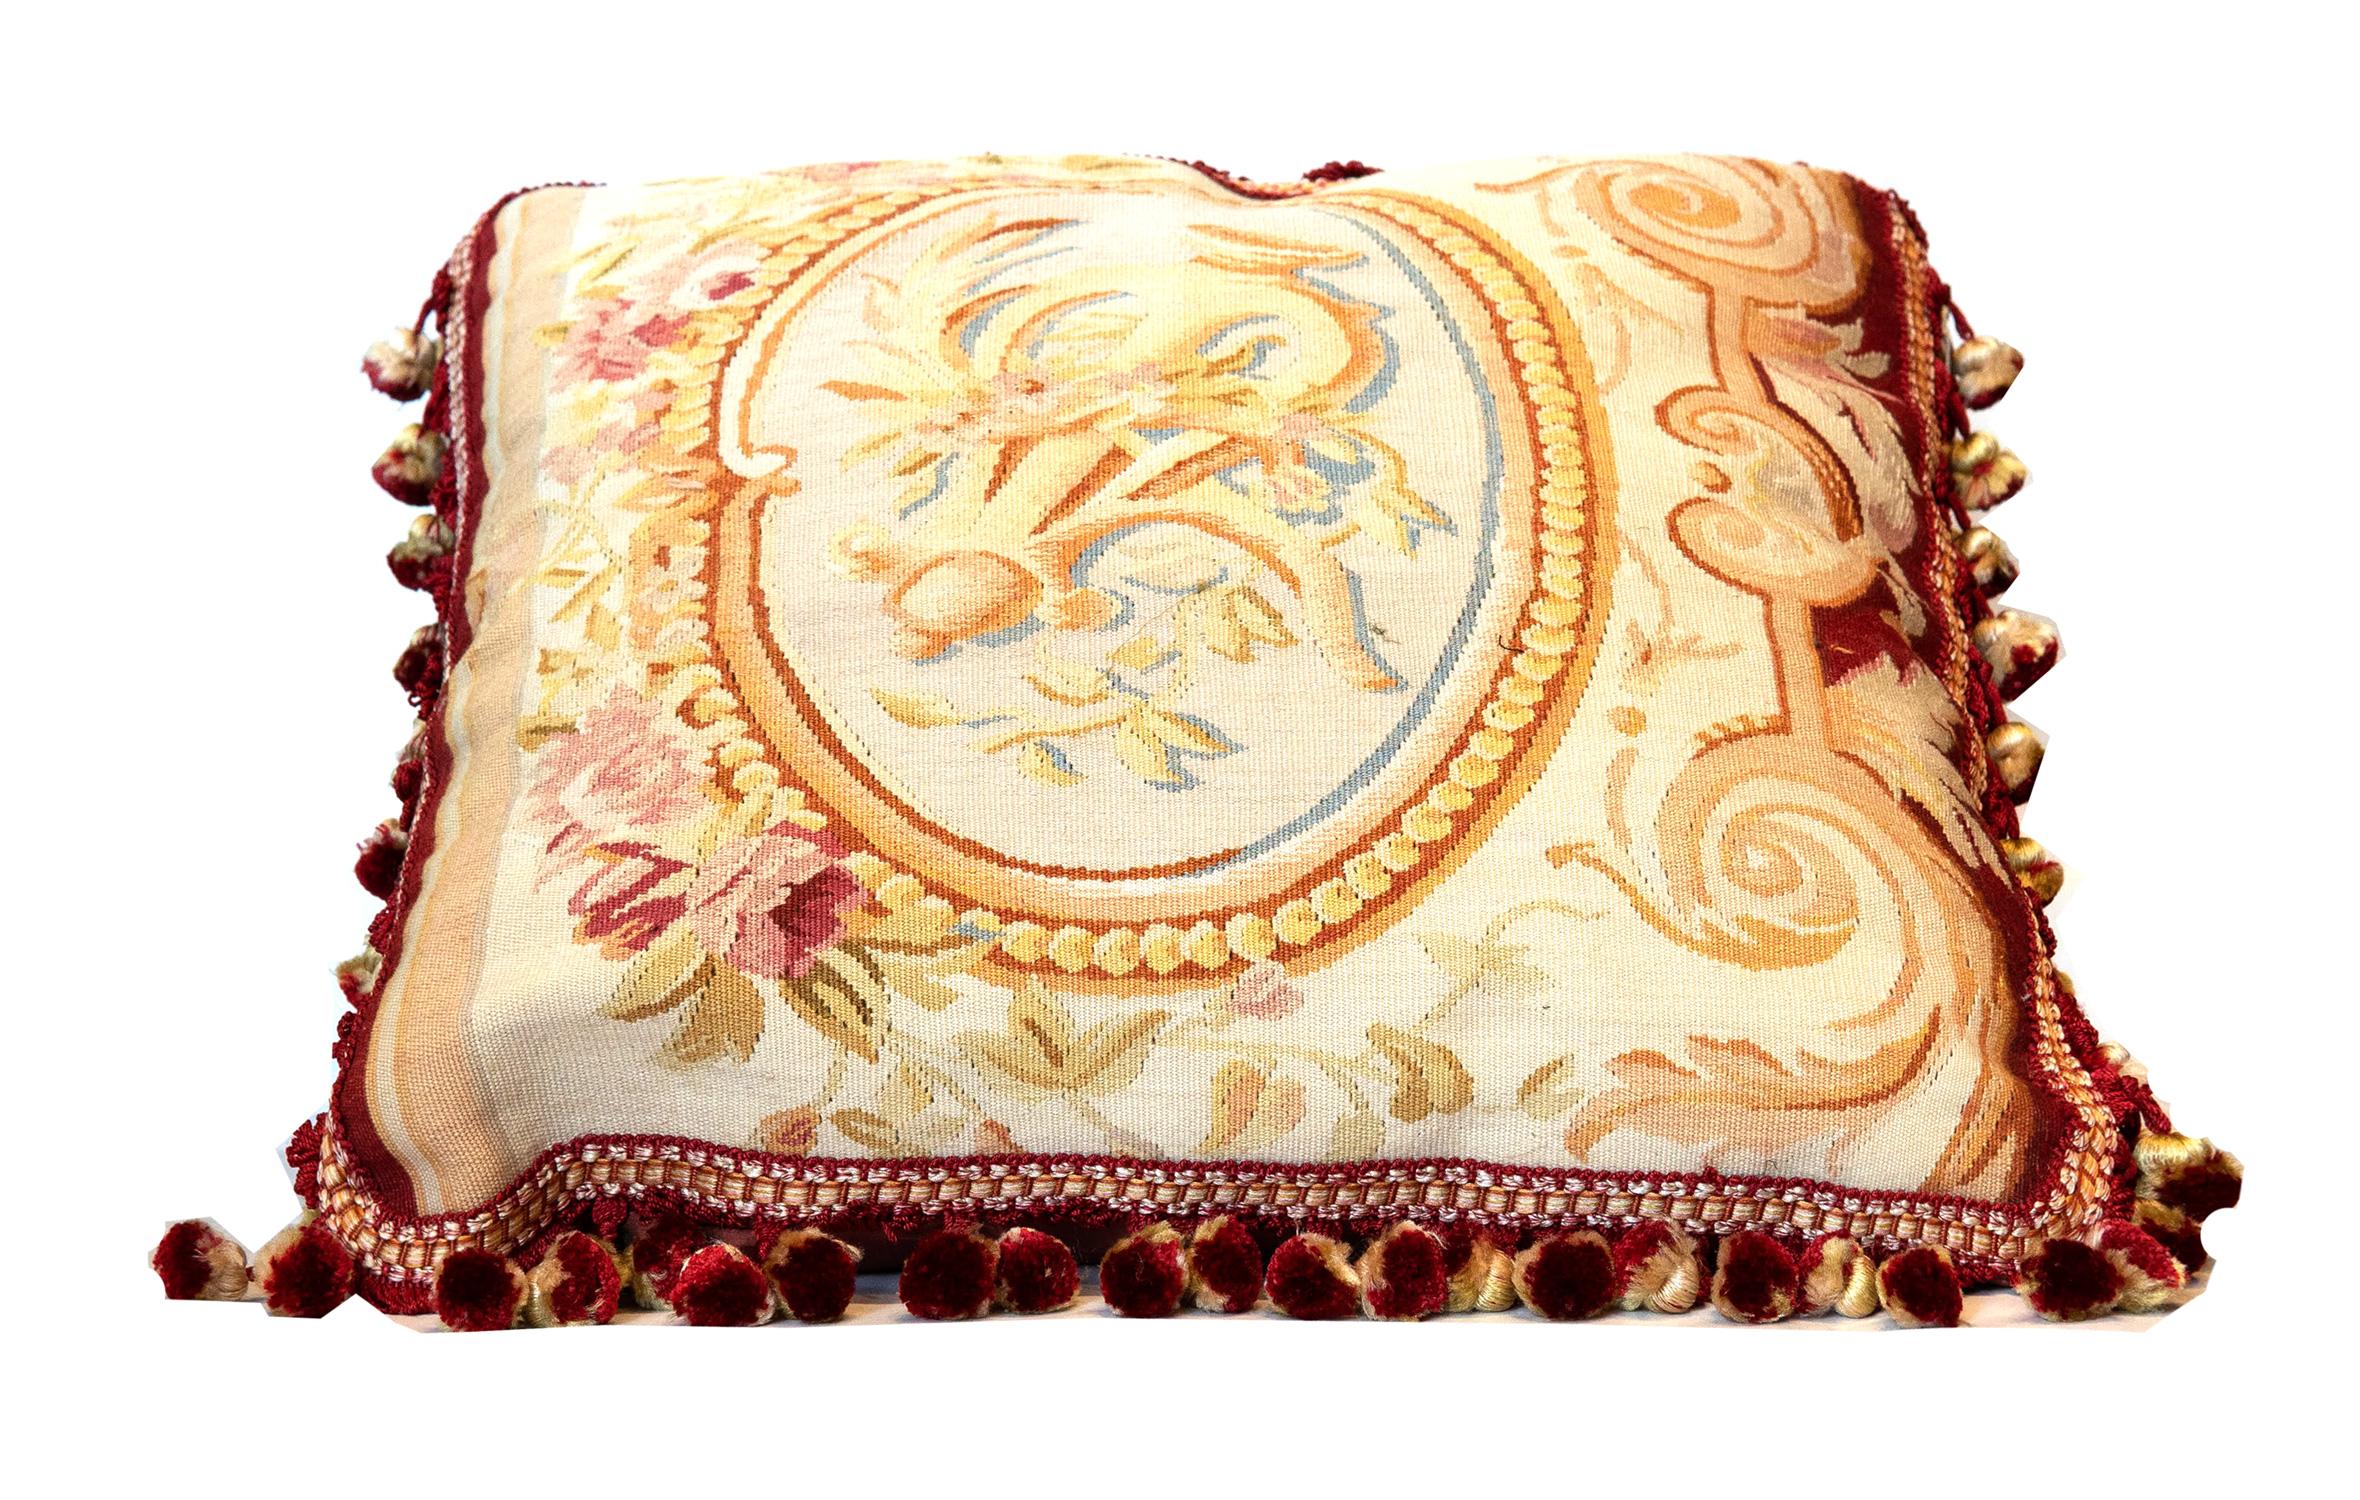 aubusson pillow covers